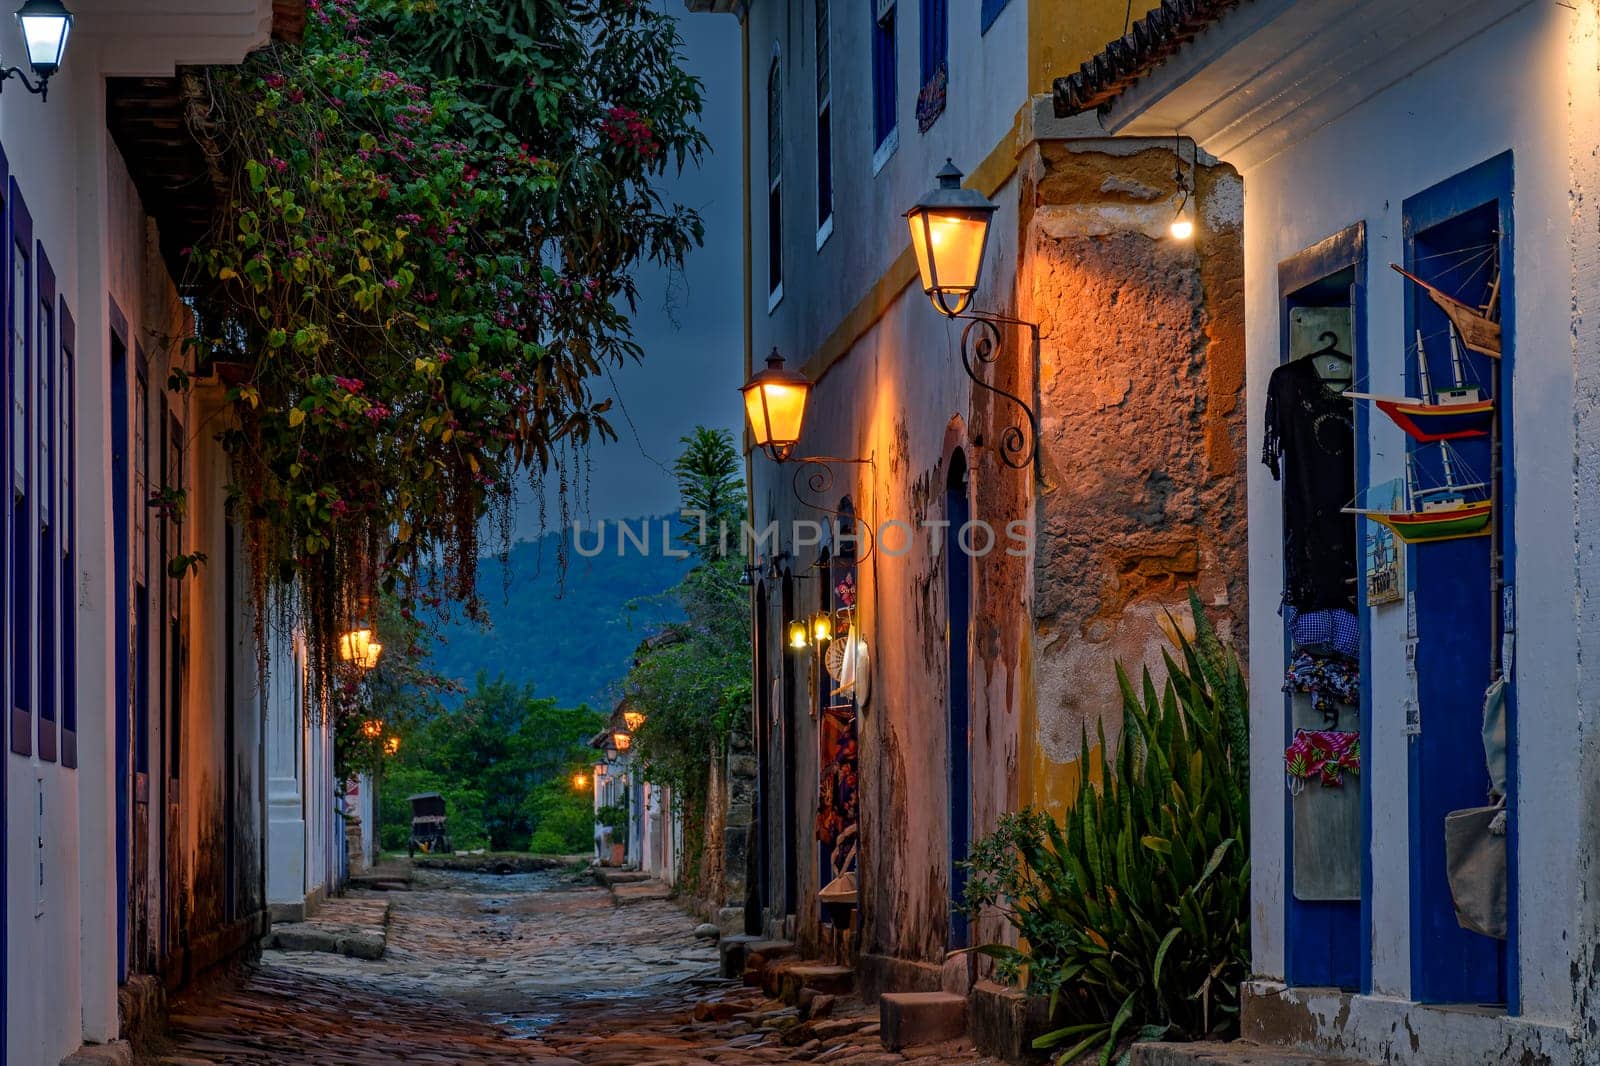 Paraty in the state of Rio de Janeiro at night by Fred_Pinheiro